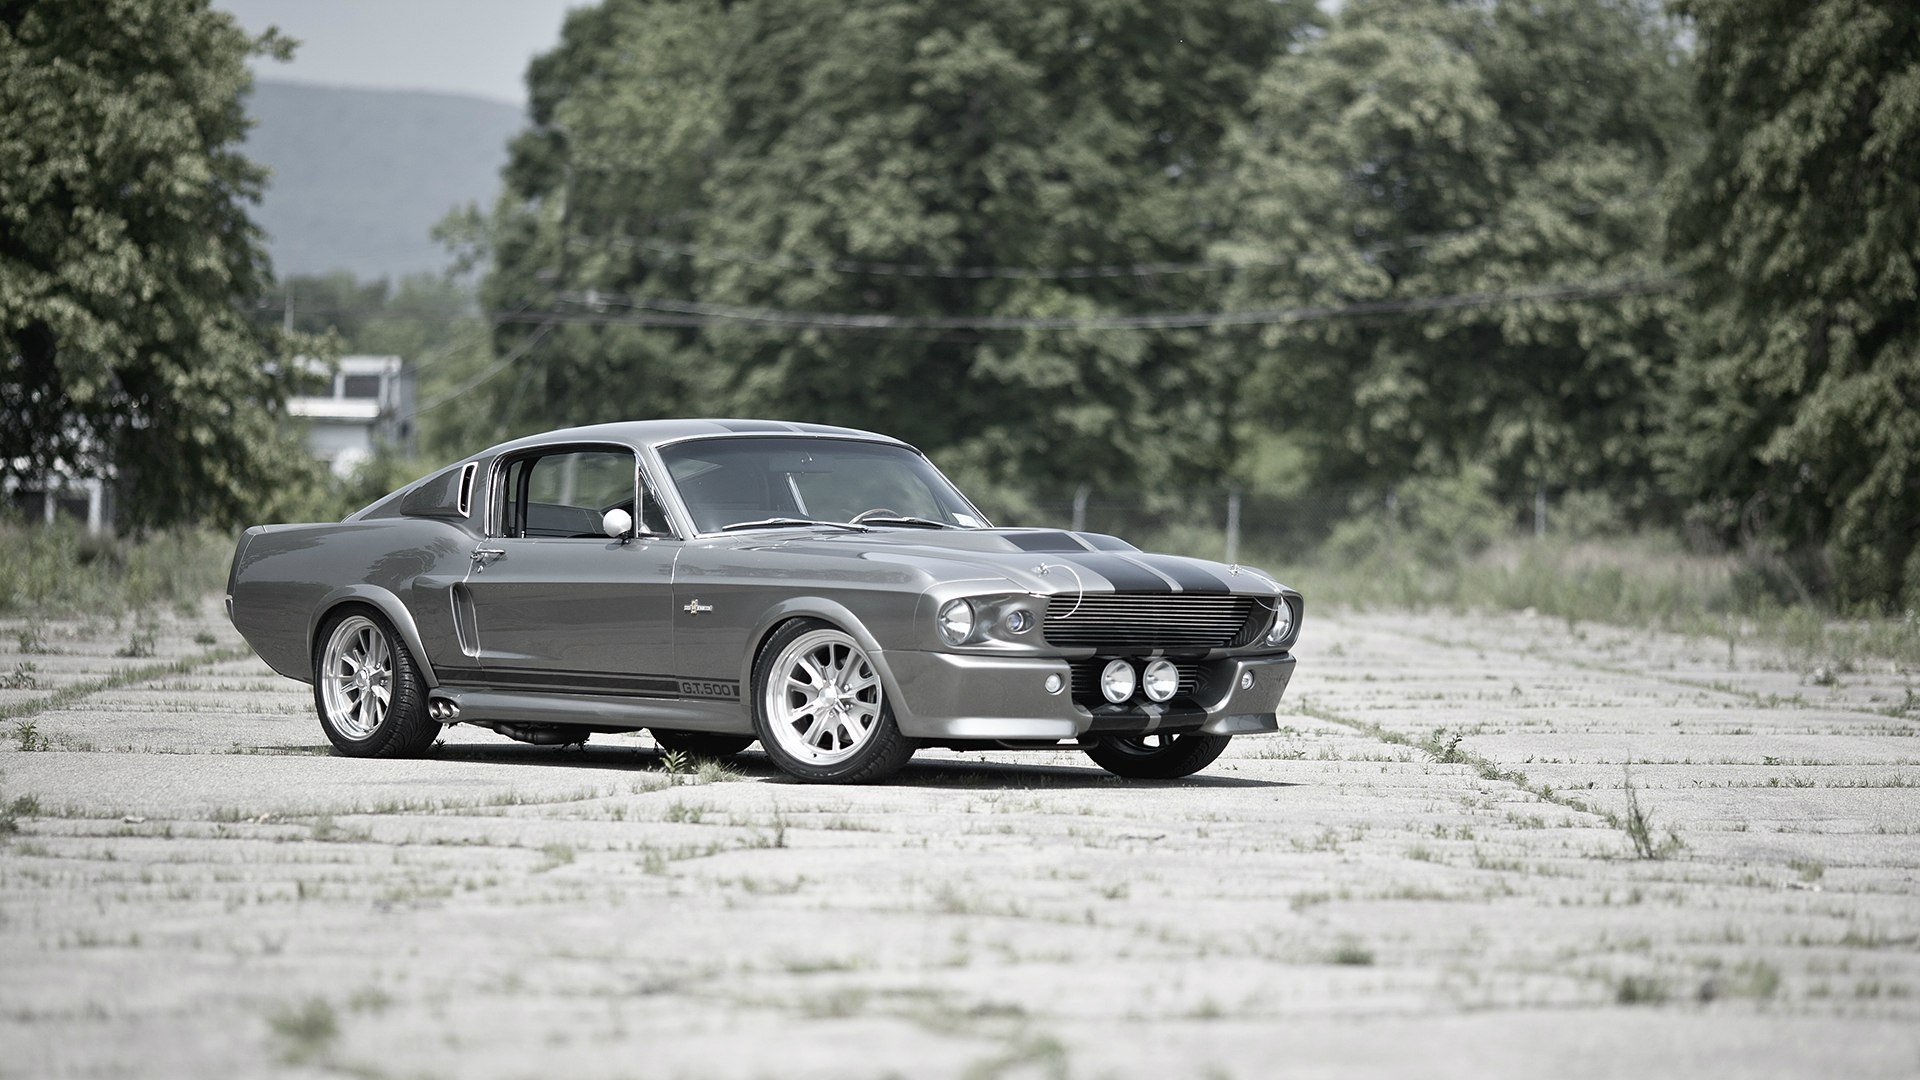 Ford Mustang Shelby Gt500 Fastback Eleanor Puter Wallpaper